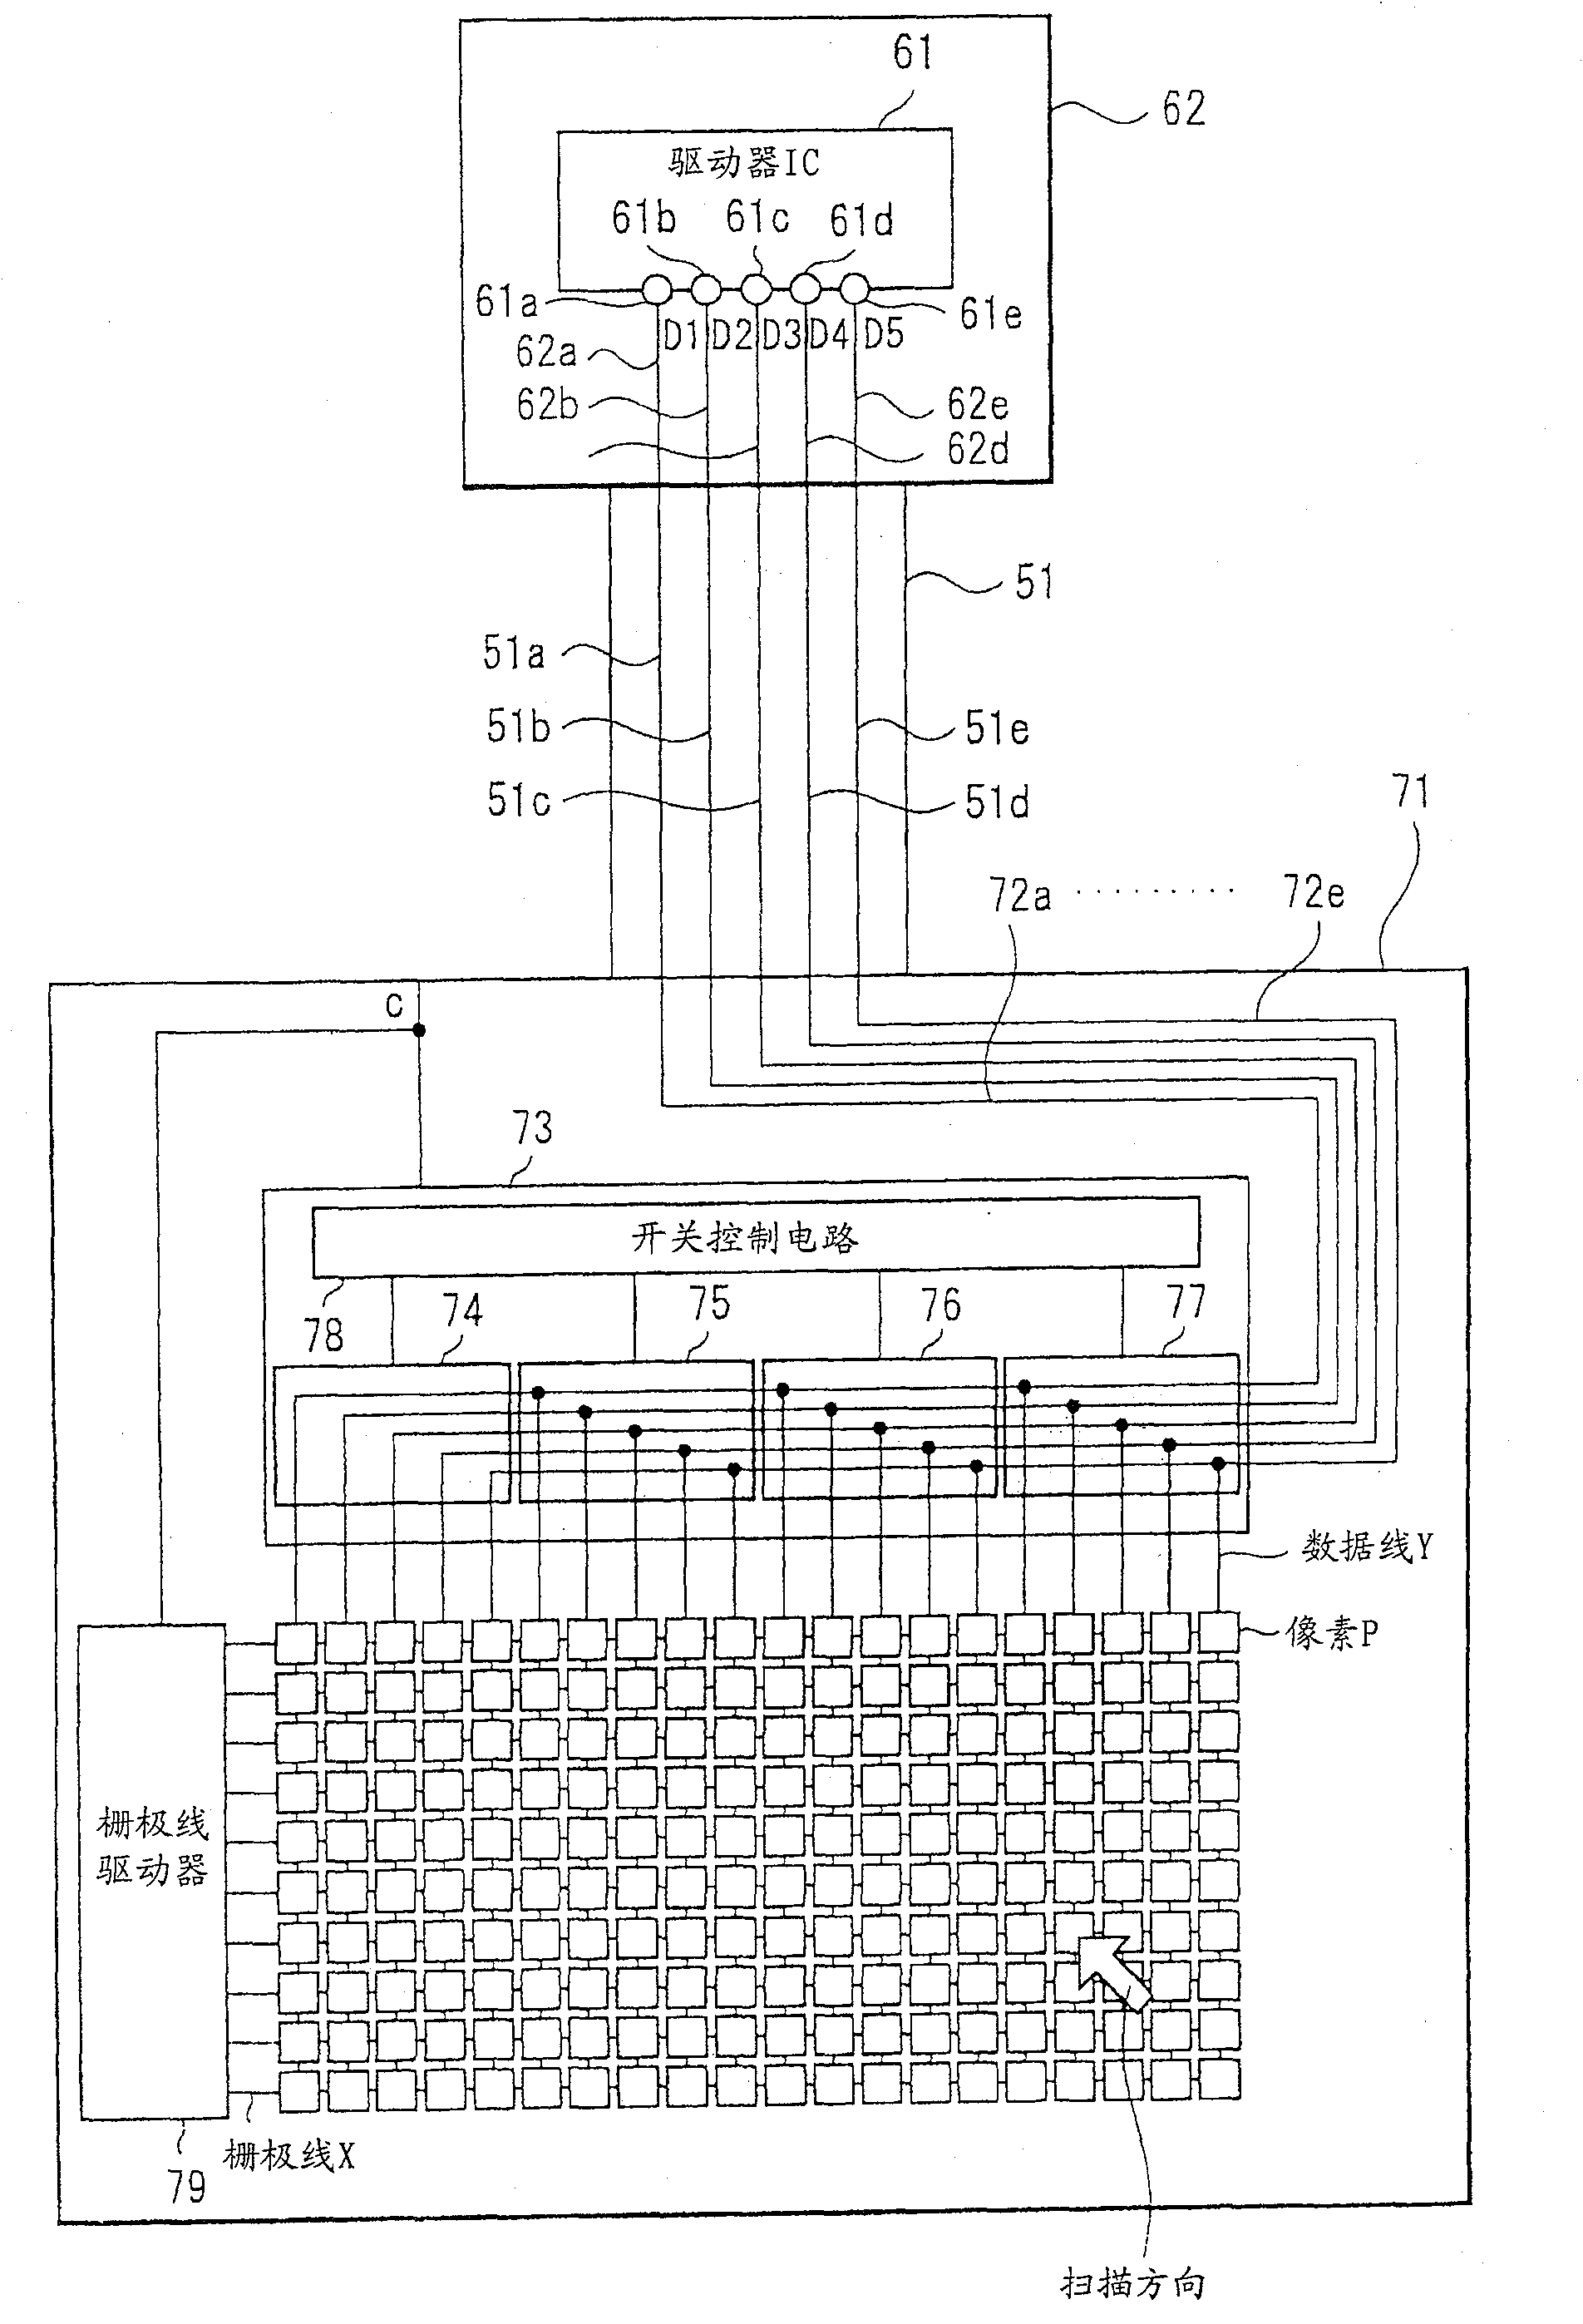 Interconnect structure for display device and projection display apparatus